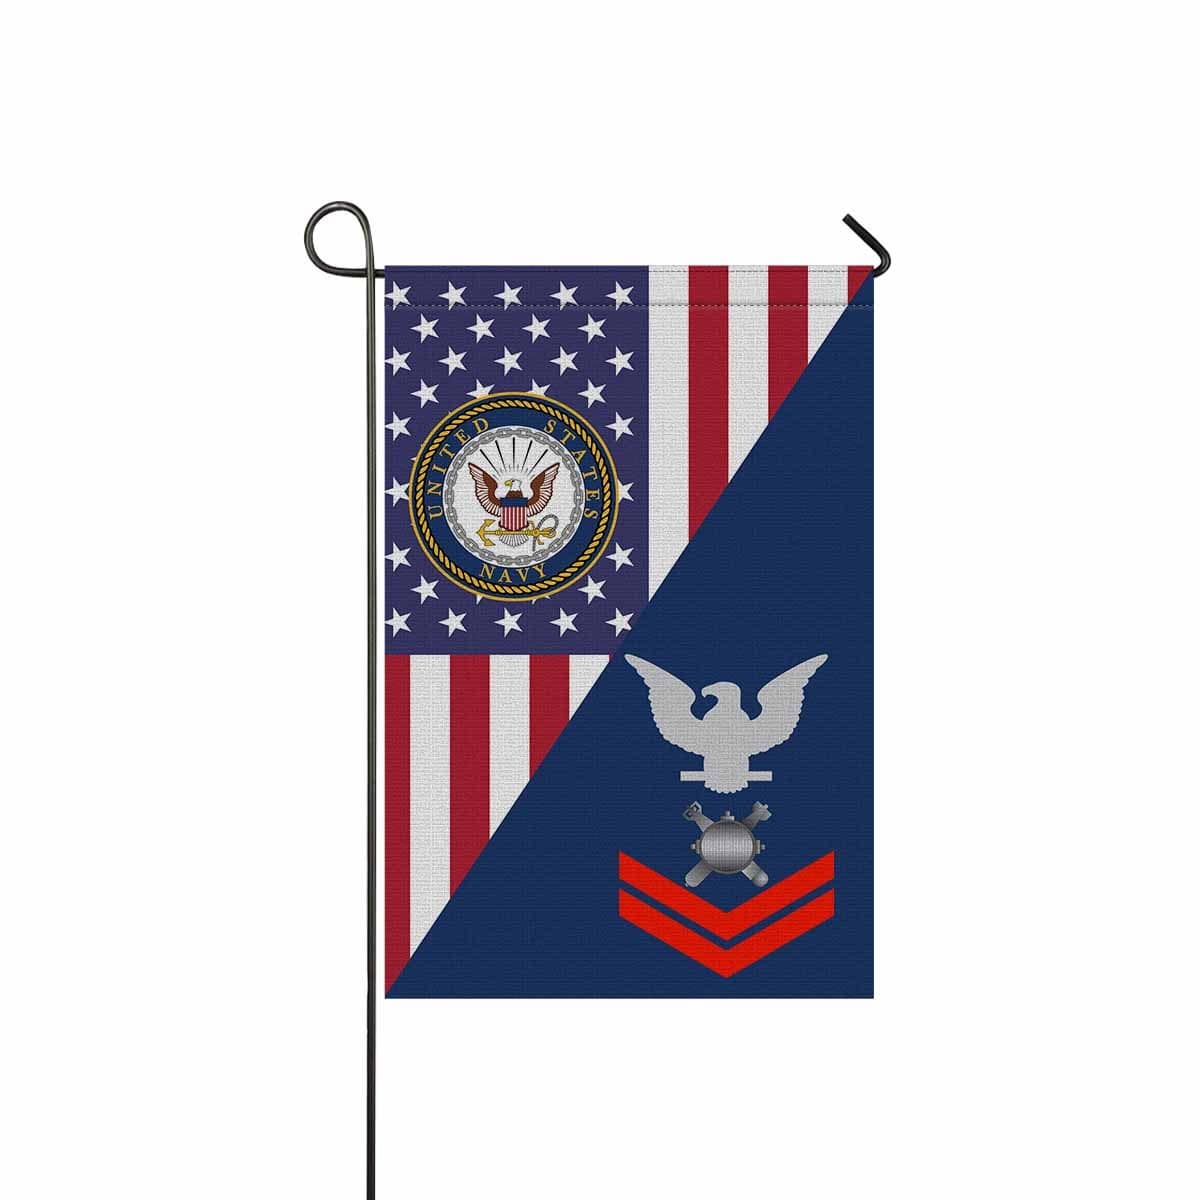 Navy Explosive Ordnance Disposal Navy EOD E-5 Red Stripe Garden Flag/Yard Flag 12 inches x 18 inches Twin-Side Printing-GDFlag-Navy-Rating-Veterans Nation